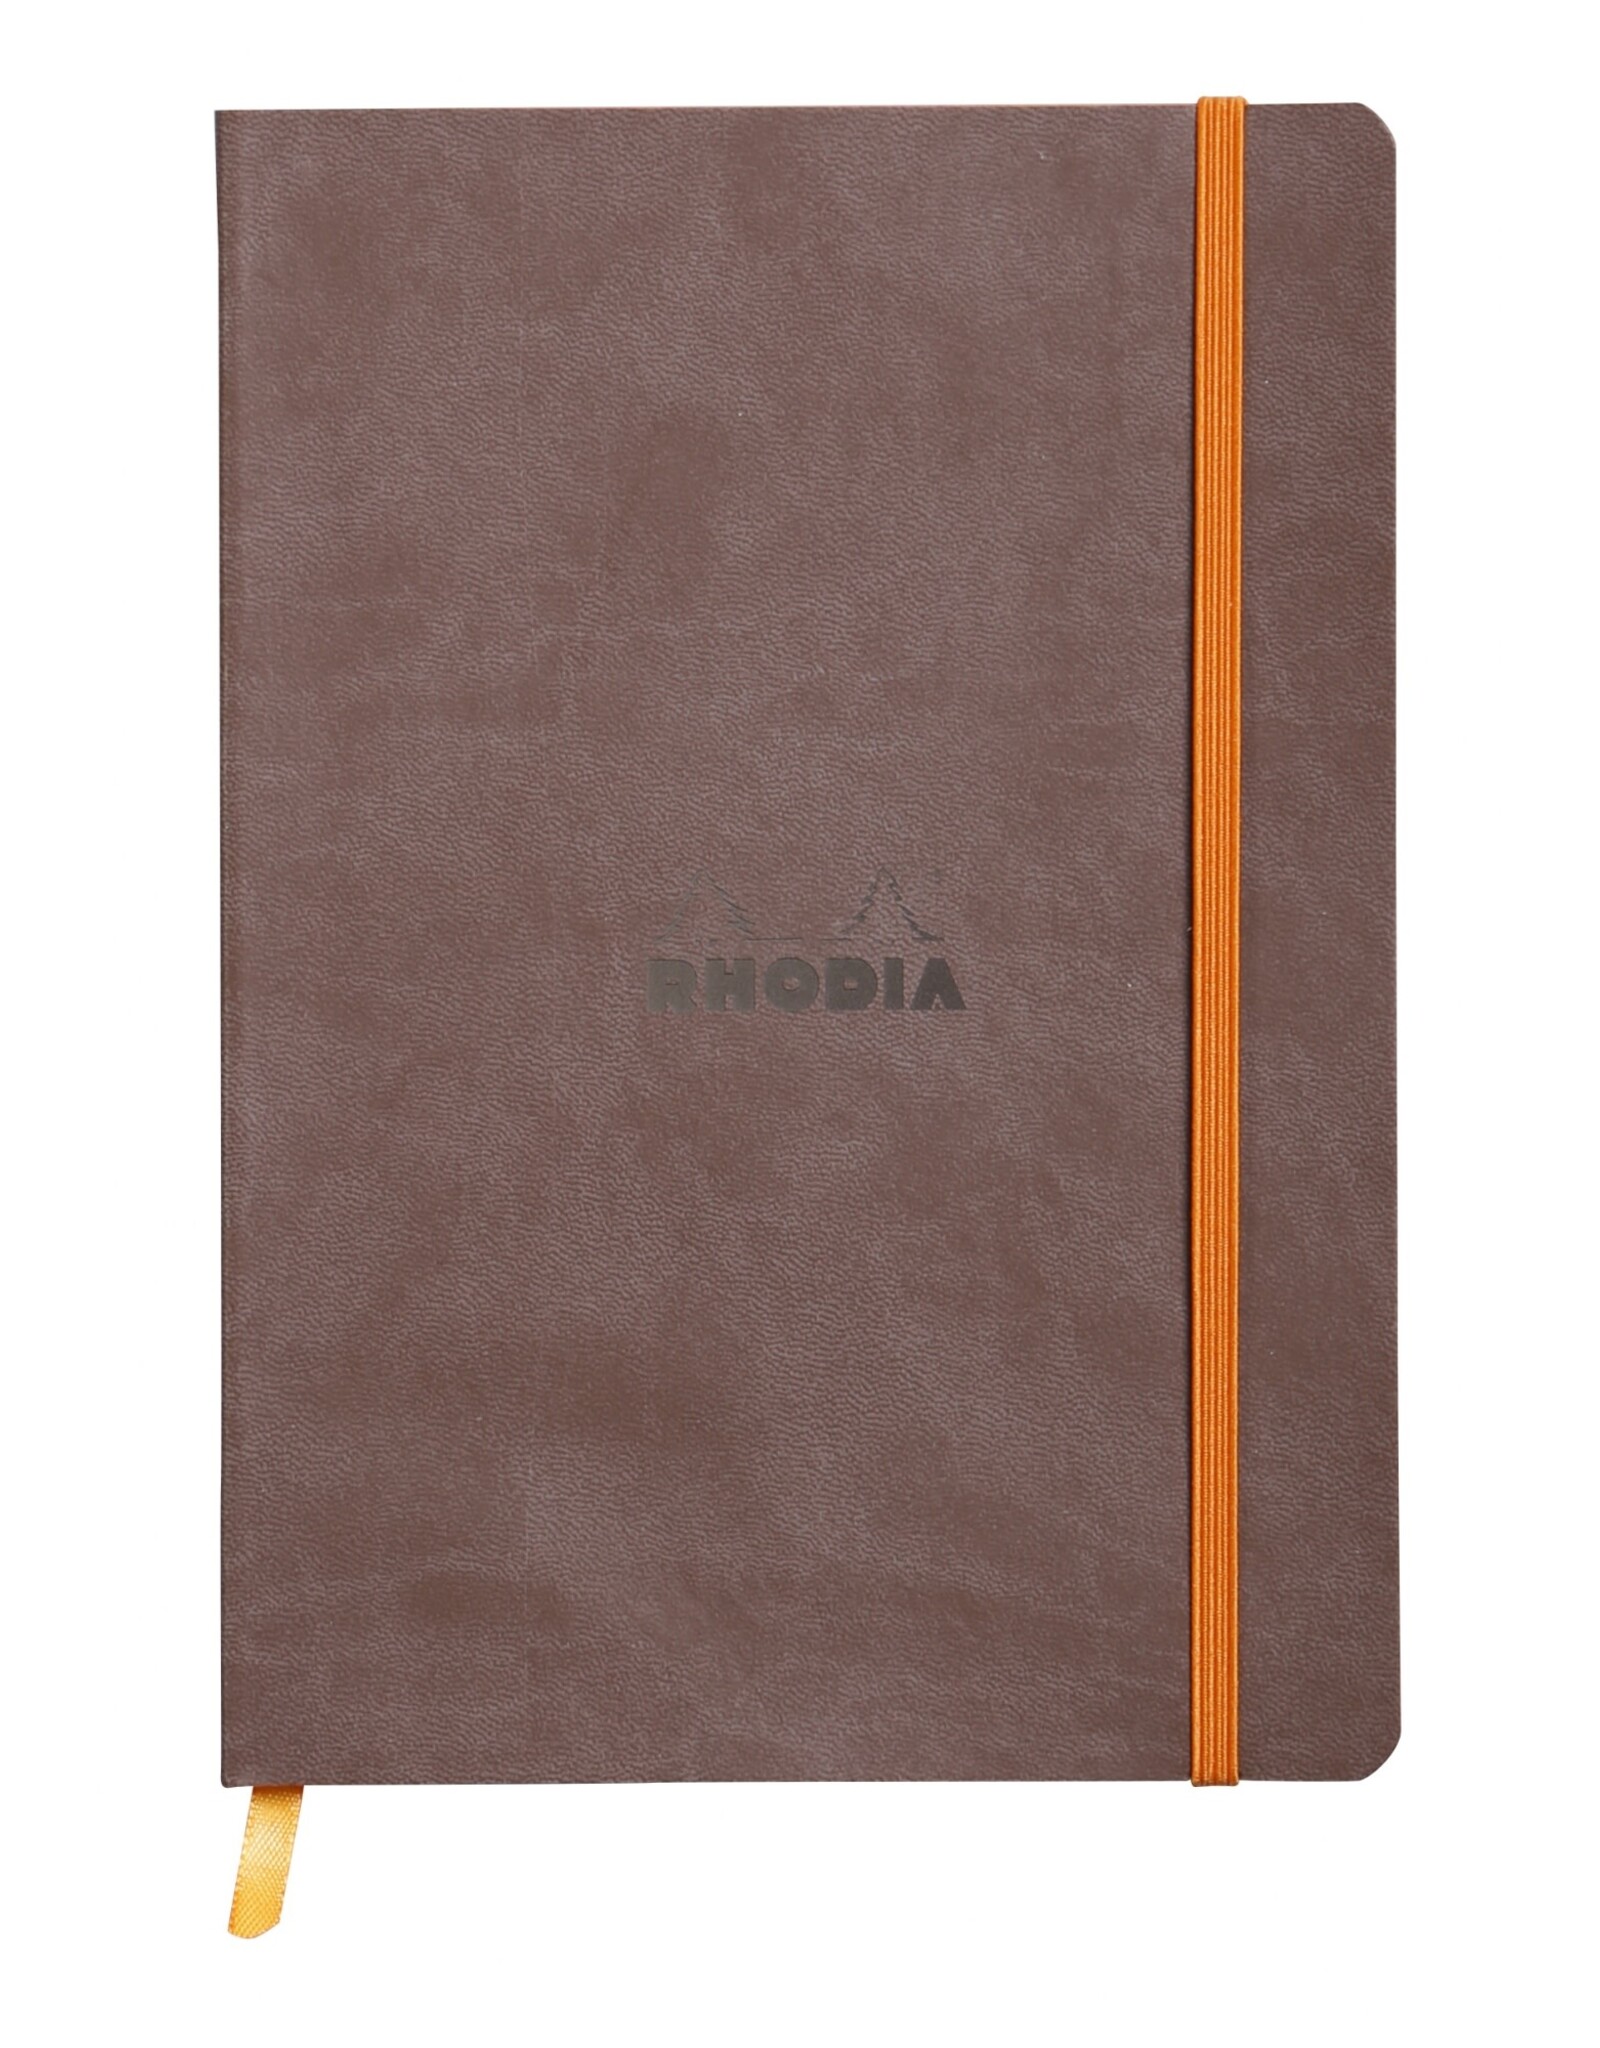 Rhodia Rhodia Rhodiarama SoftCover Notebook, 80 Dotted Sheets, 6" x 8 1/4", Chocolate